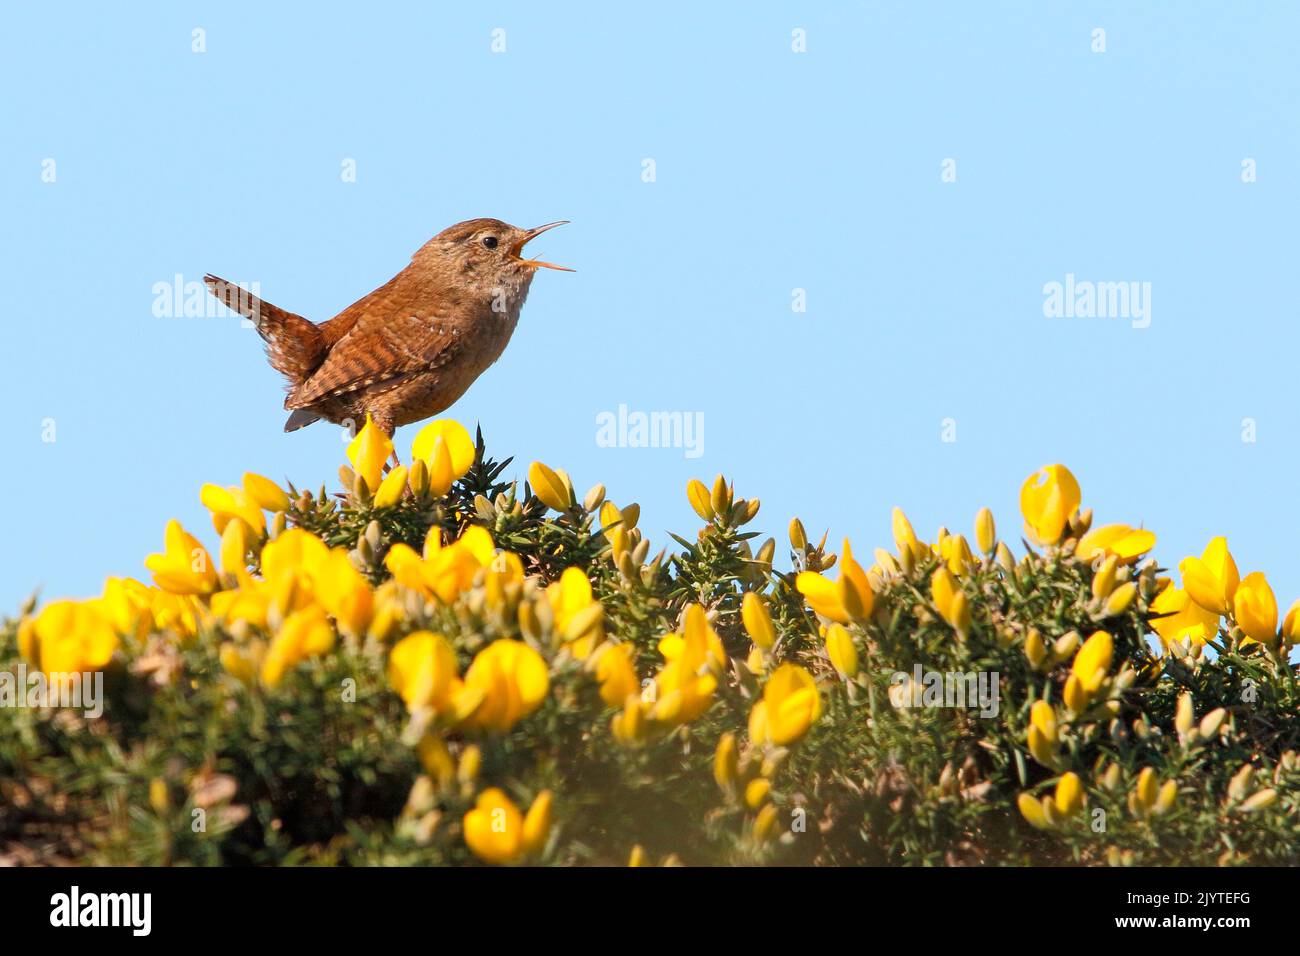 Wren (Troglodytes troglodytes)singing on the gorse in bloom against a blue sky and its territory in spring, Finistere, France Stock Photo